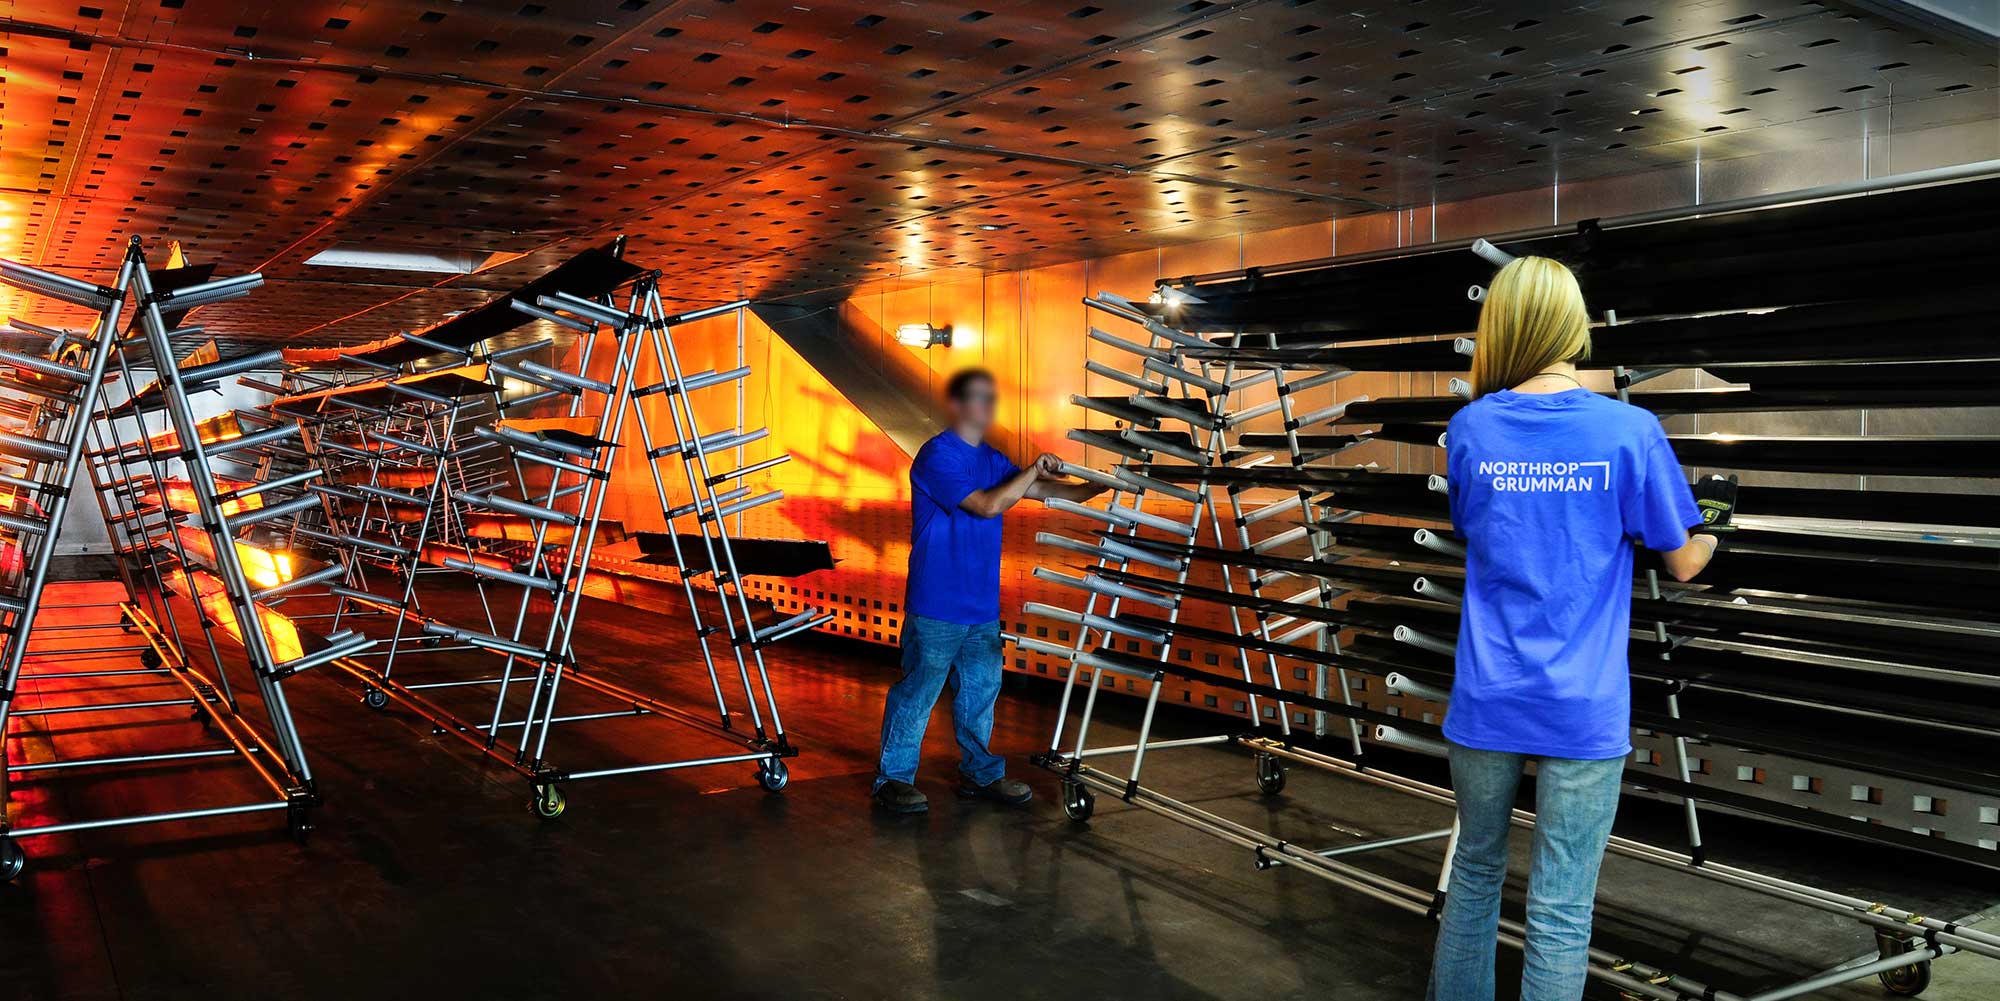 Two people putting metal aircraft pieces on racks